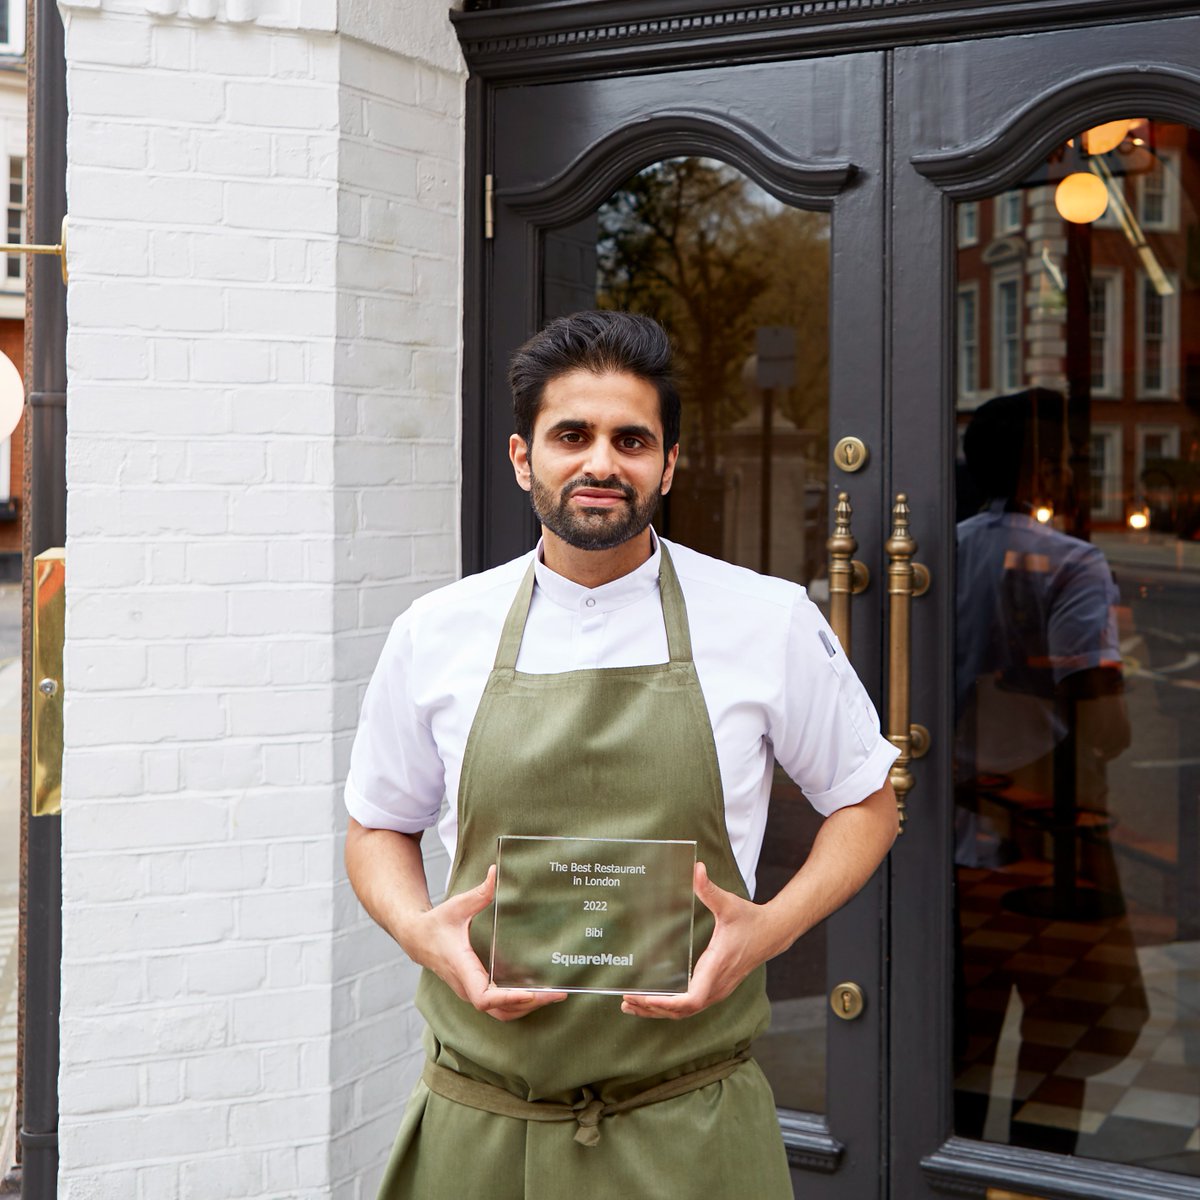 🏆 BiBi is our #1 Restaurant in London 2022 🏆 @ChetSharmaOx employs a variety of unusual techniques to create truly unique dishes, often turning Indian classics on their heads. Read our full review here: bit.ly/3JAUzl5